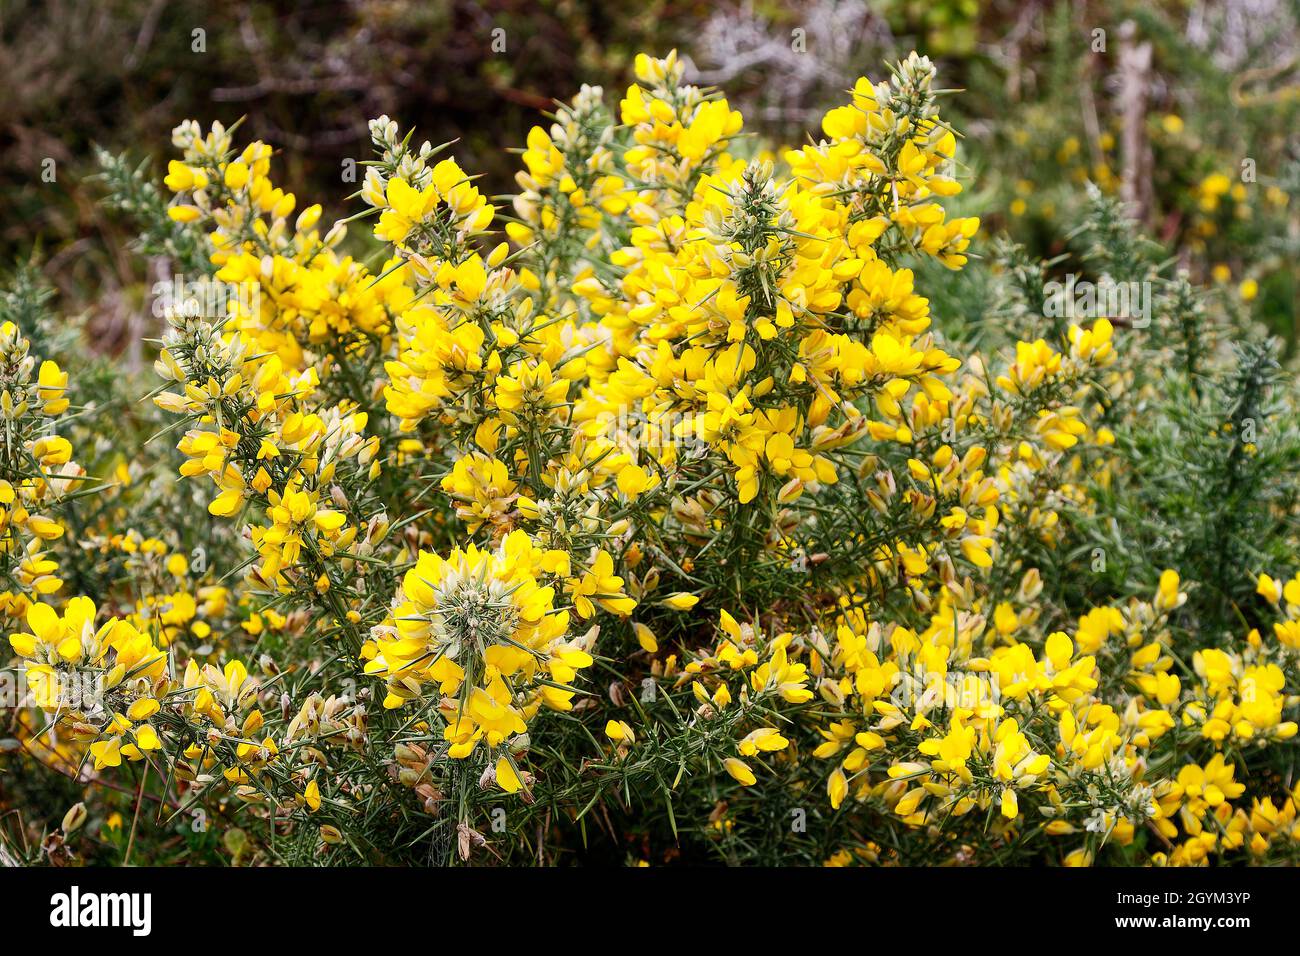 Scotch broom, yellow flowers, perennial shrub, pea family, Cytisus scoparius, noxious if ingested, spreads rapidly, can be invasive, Cape Foulwind Wal Stock Photo